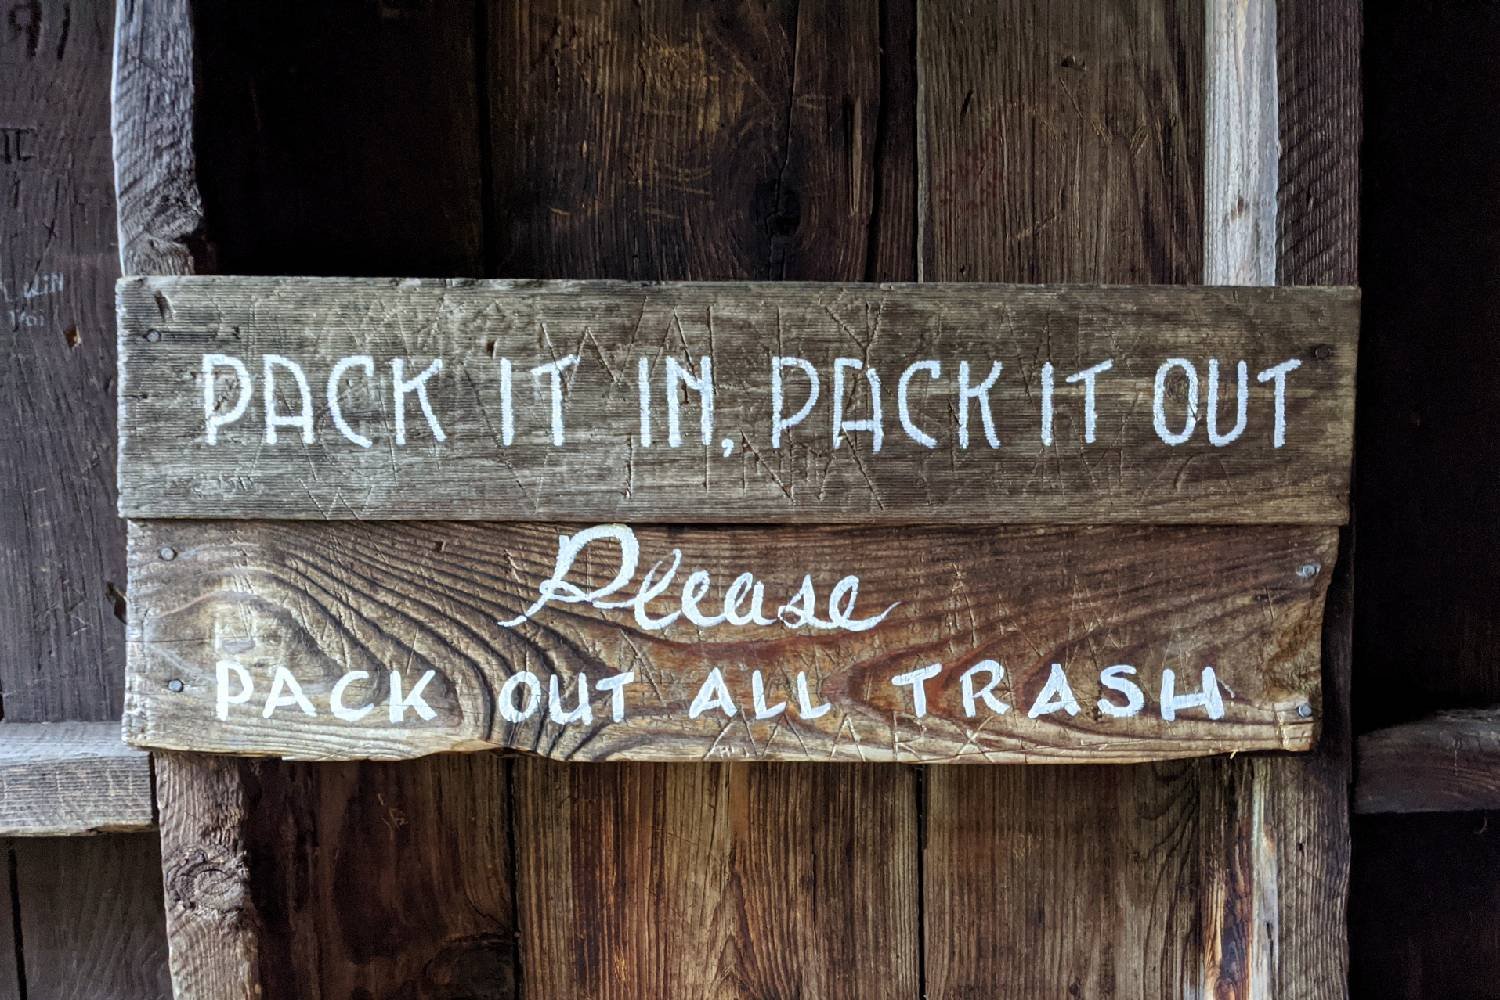 A wooden sign that says pack it in pack it out please pack out all trash